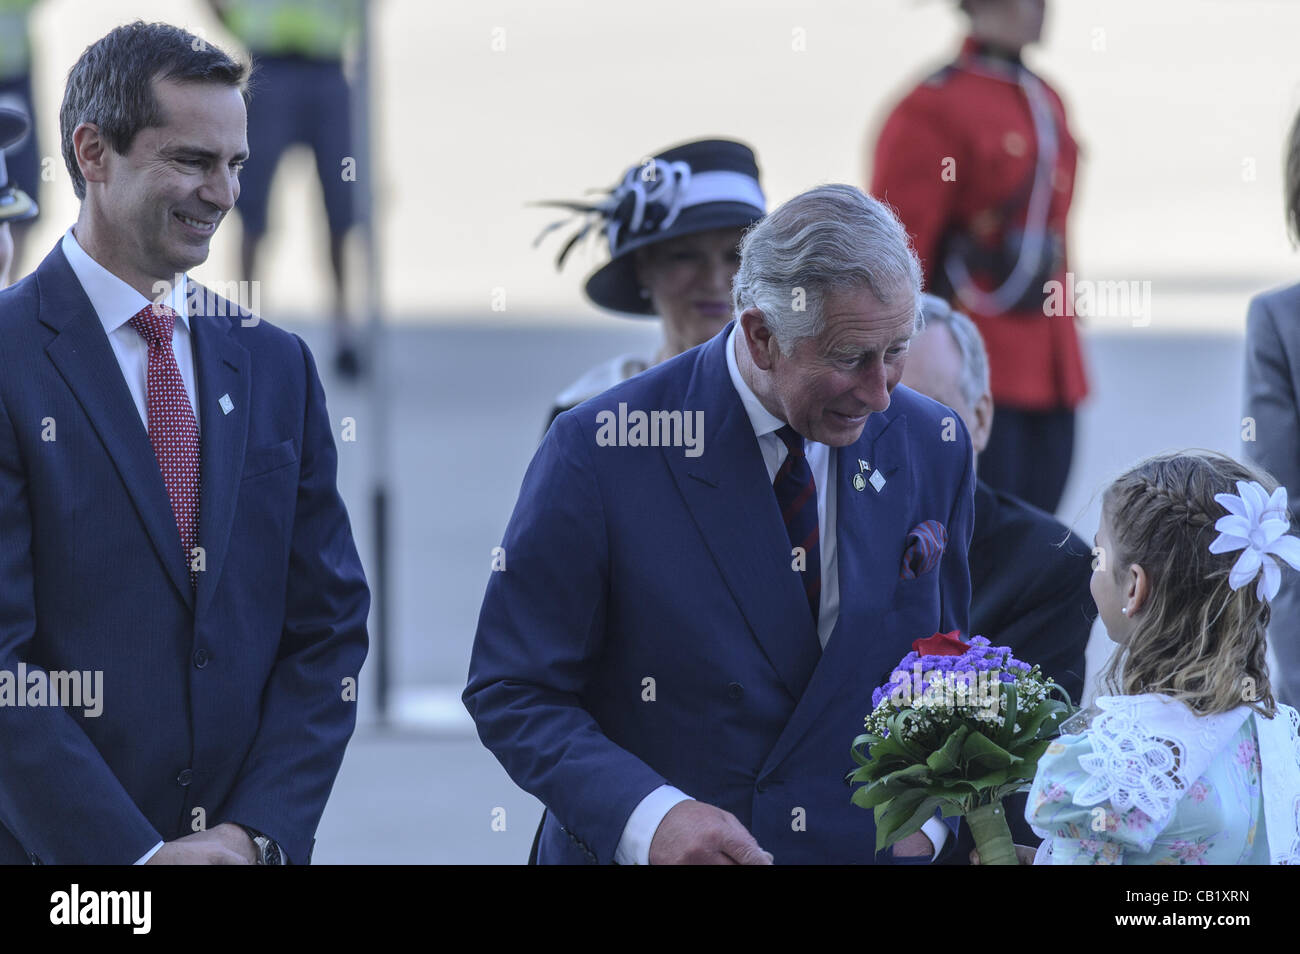 May 21, 2012 - Toronto, Ontario, Canada - PRINCE CHARLES and his wife CAMILLA, Duchess of Cornwall have kicked off the Ontario leg of their Canadian tour. In picture - Ontratio Premier DALTON MCGUINTY, PRINCE CHARLES, MORGAN MARIE FREMLIN. (Credit Image: © Igor Vidyashev/ZUMAPRESS.com) Stock Photo